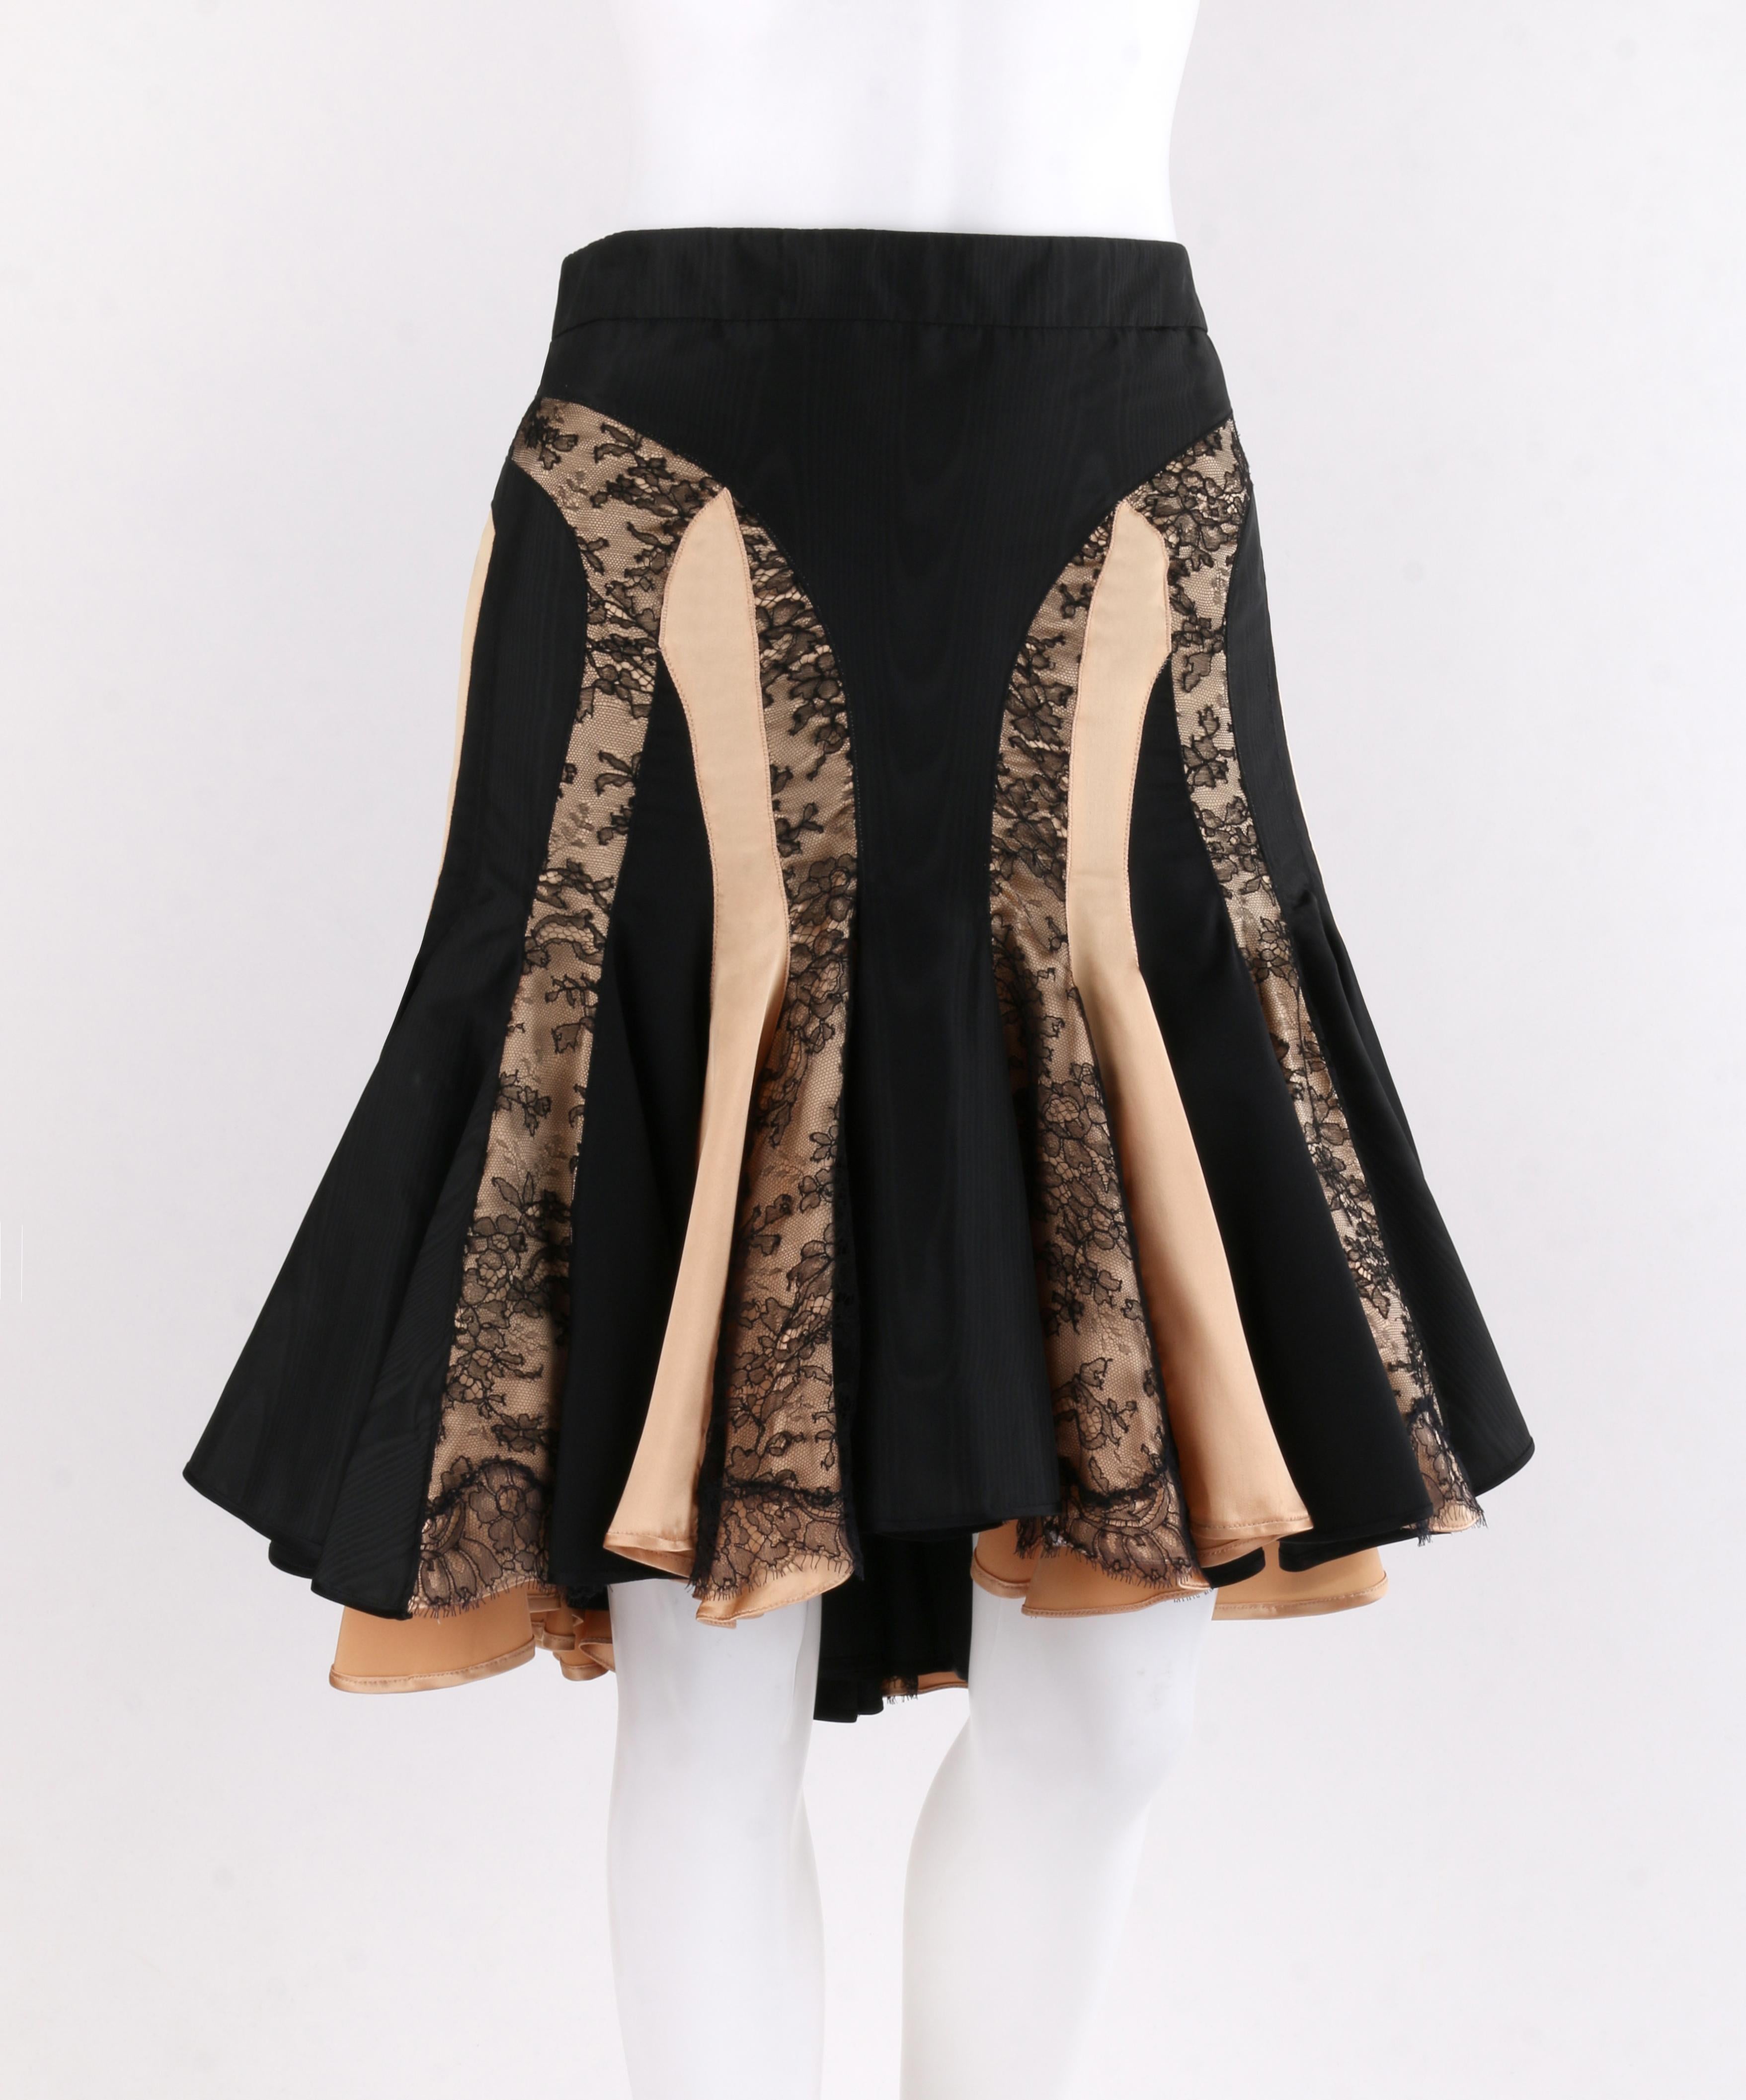 ALEXANDER McQUEEN S/S 2004 Black Champagne Silk Lace Flared High Low Trumpet Skirt
 
Brand / Manufacturer: Alexander McQueen
Collection: Spring / Summer 2004
Style: Flared, trumpet, high low skirt
Color(s): Shades of champagne and black 
Lined: